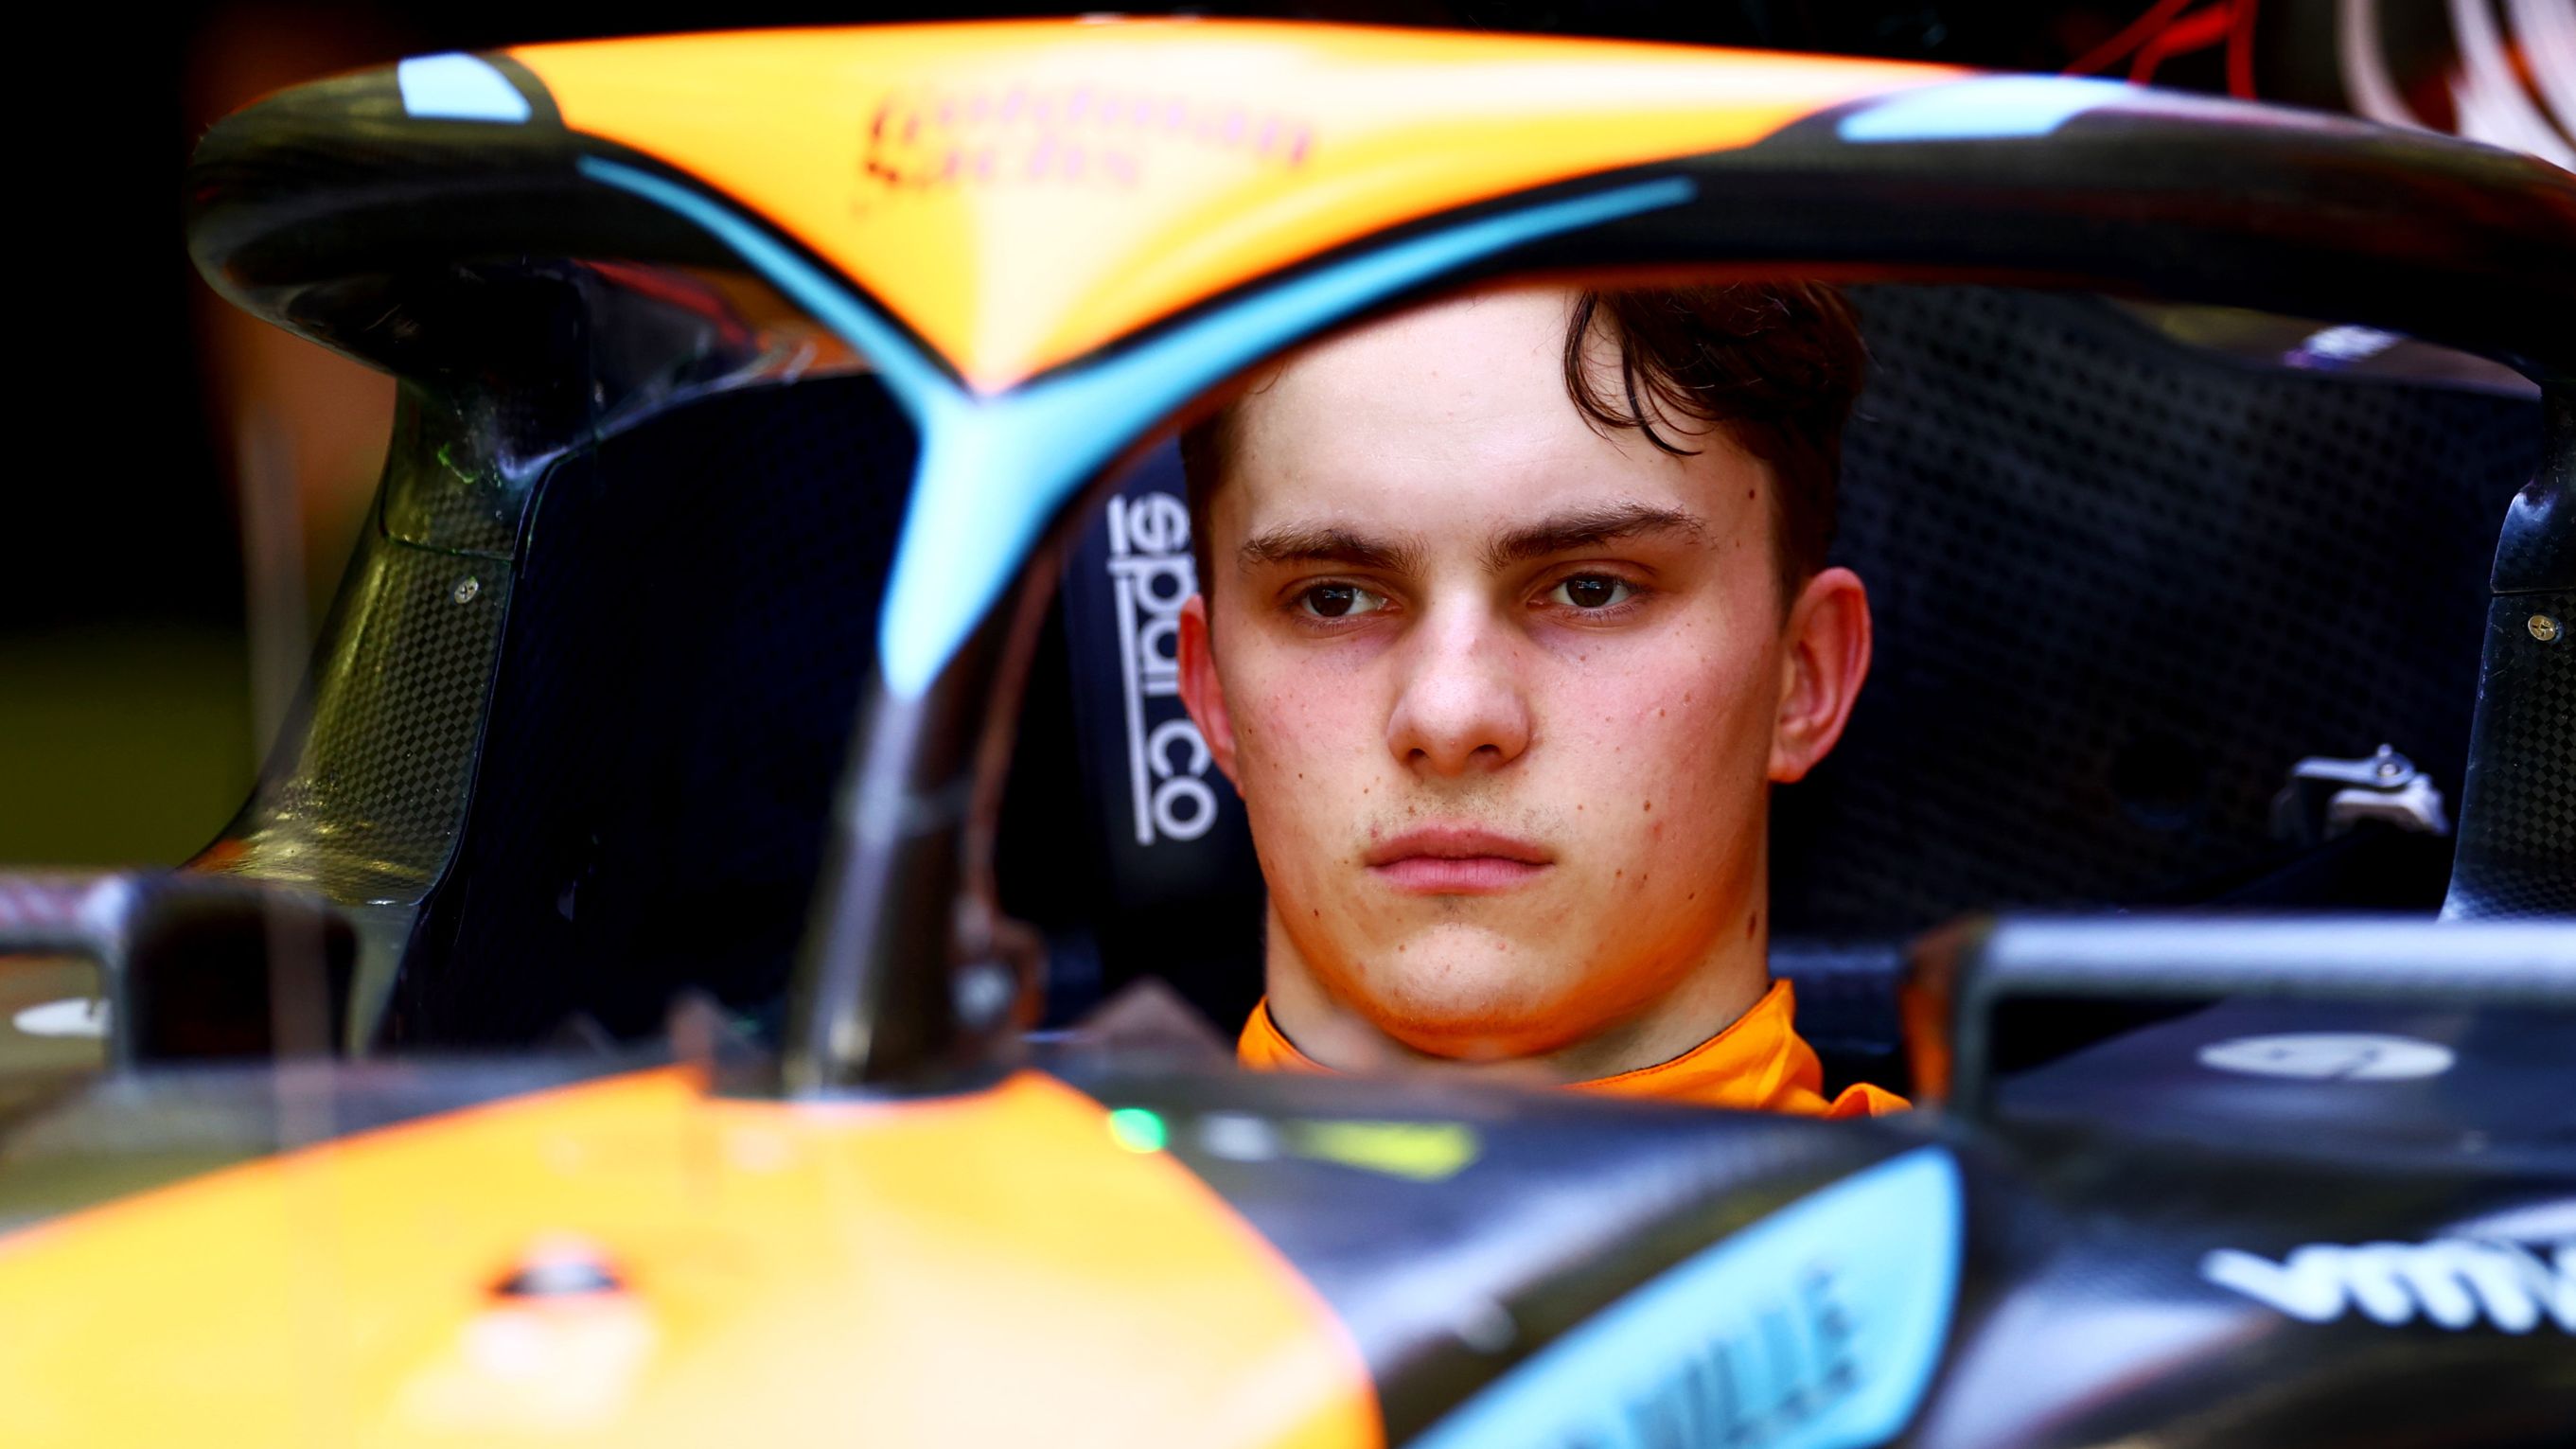 Oscar Piastri of Australia and McLaren sits in his car in the garage during day three of F1 Testing at Bahrain International Circuit on February 25, 2023 in Bahrain, Bahrain. (Photo by Dan Istitene - Formula 1/Formula 1 via Getty Images)